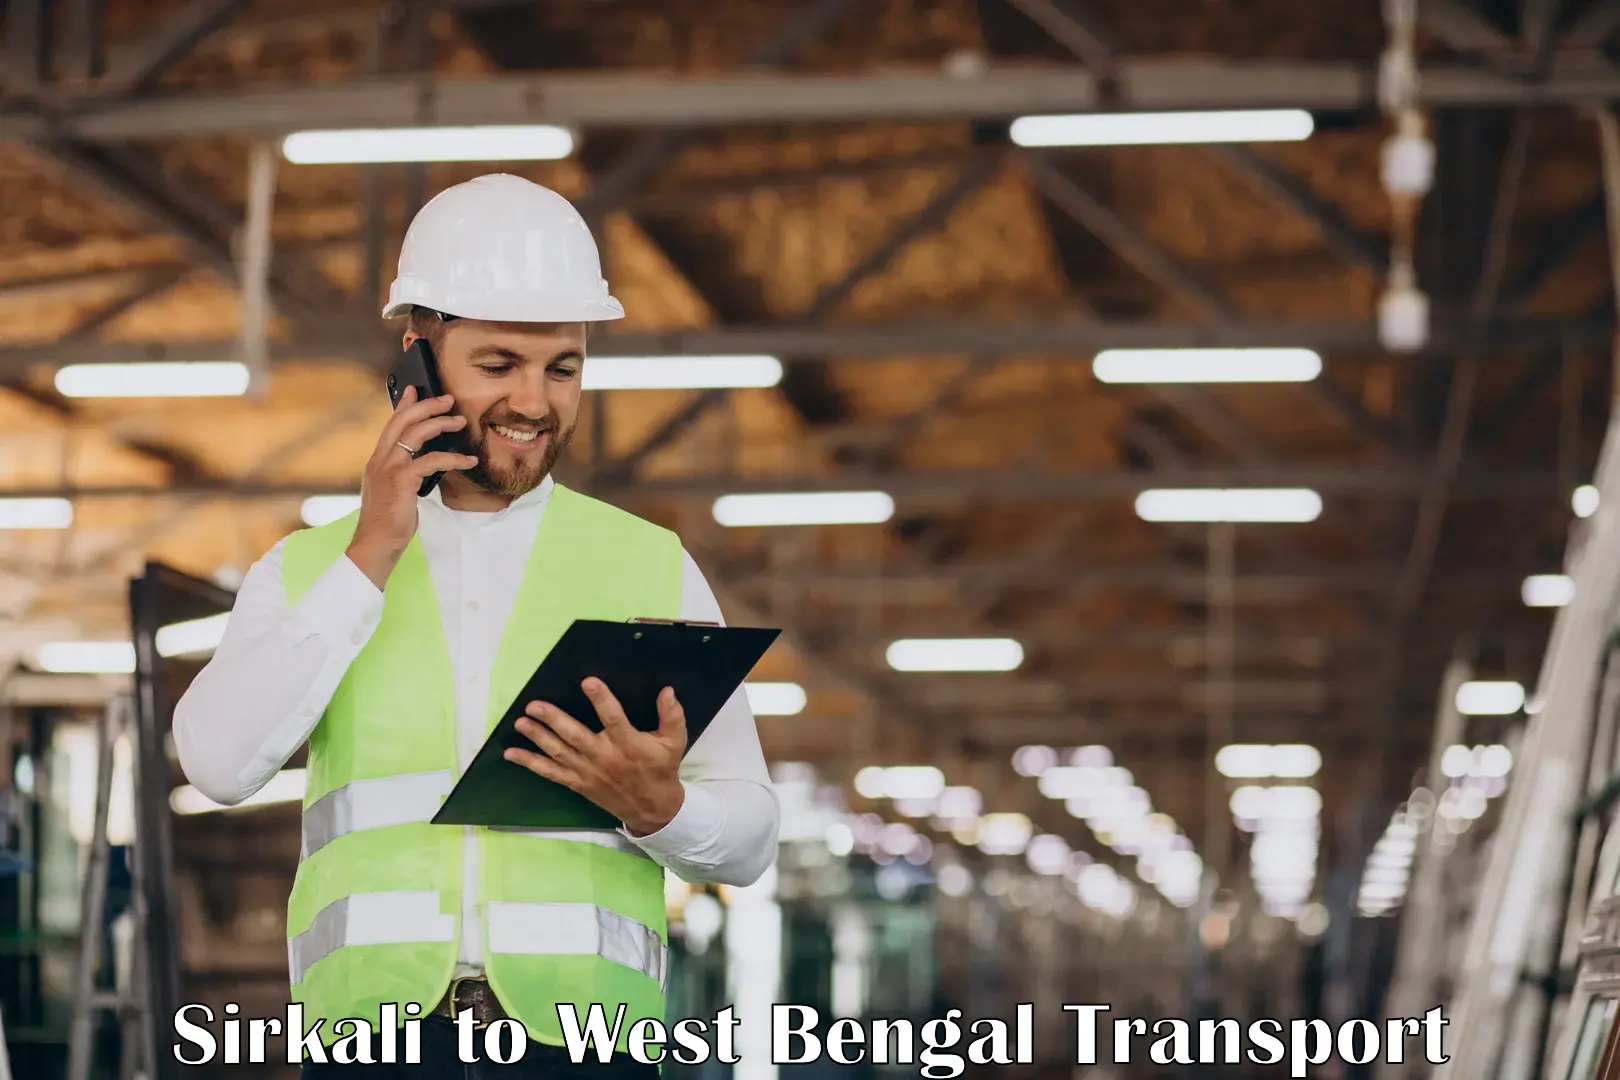 Cycle transportation service Sirkali to West Bengal